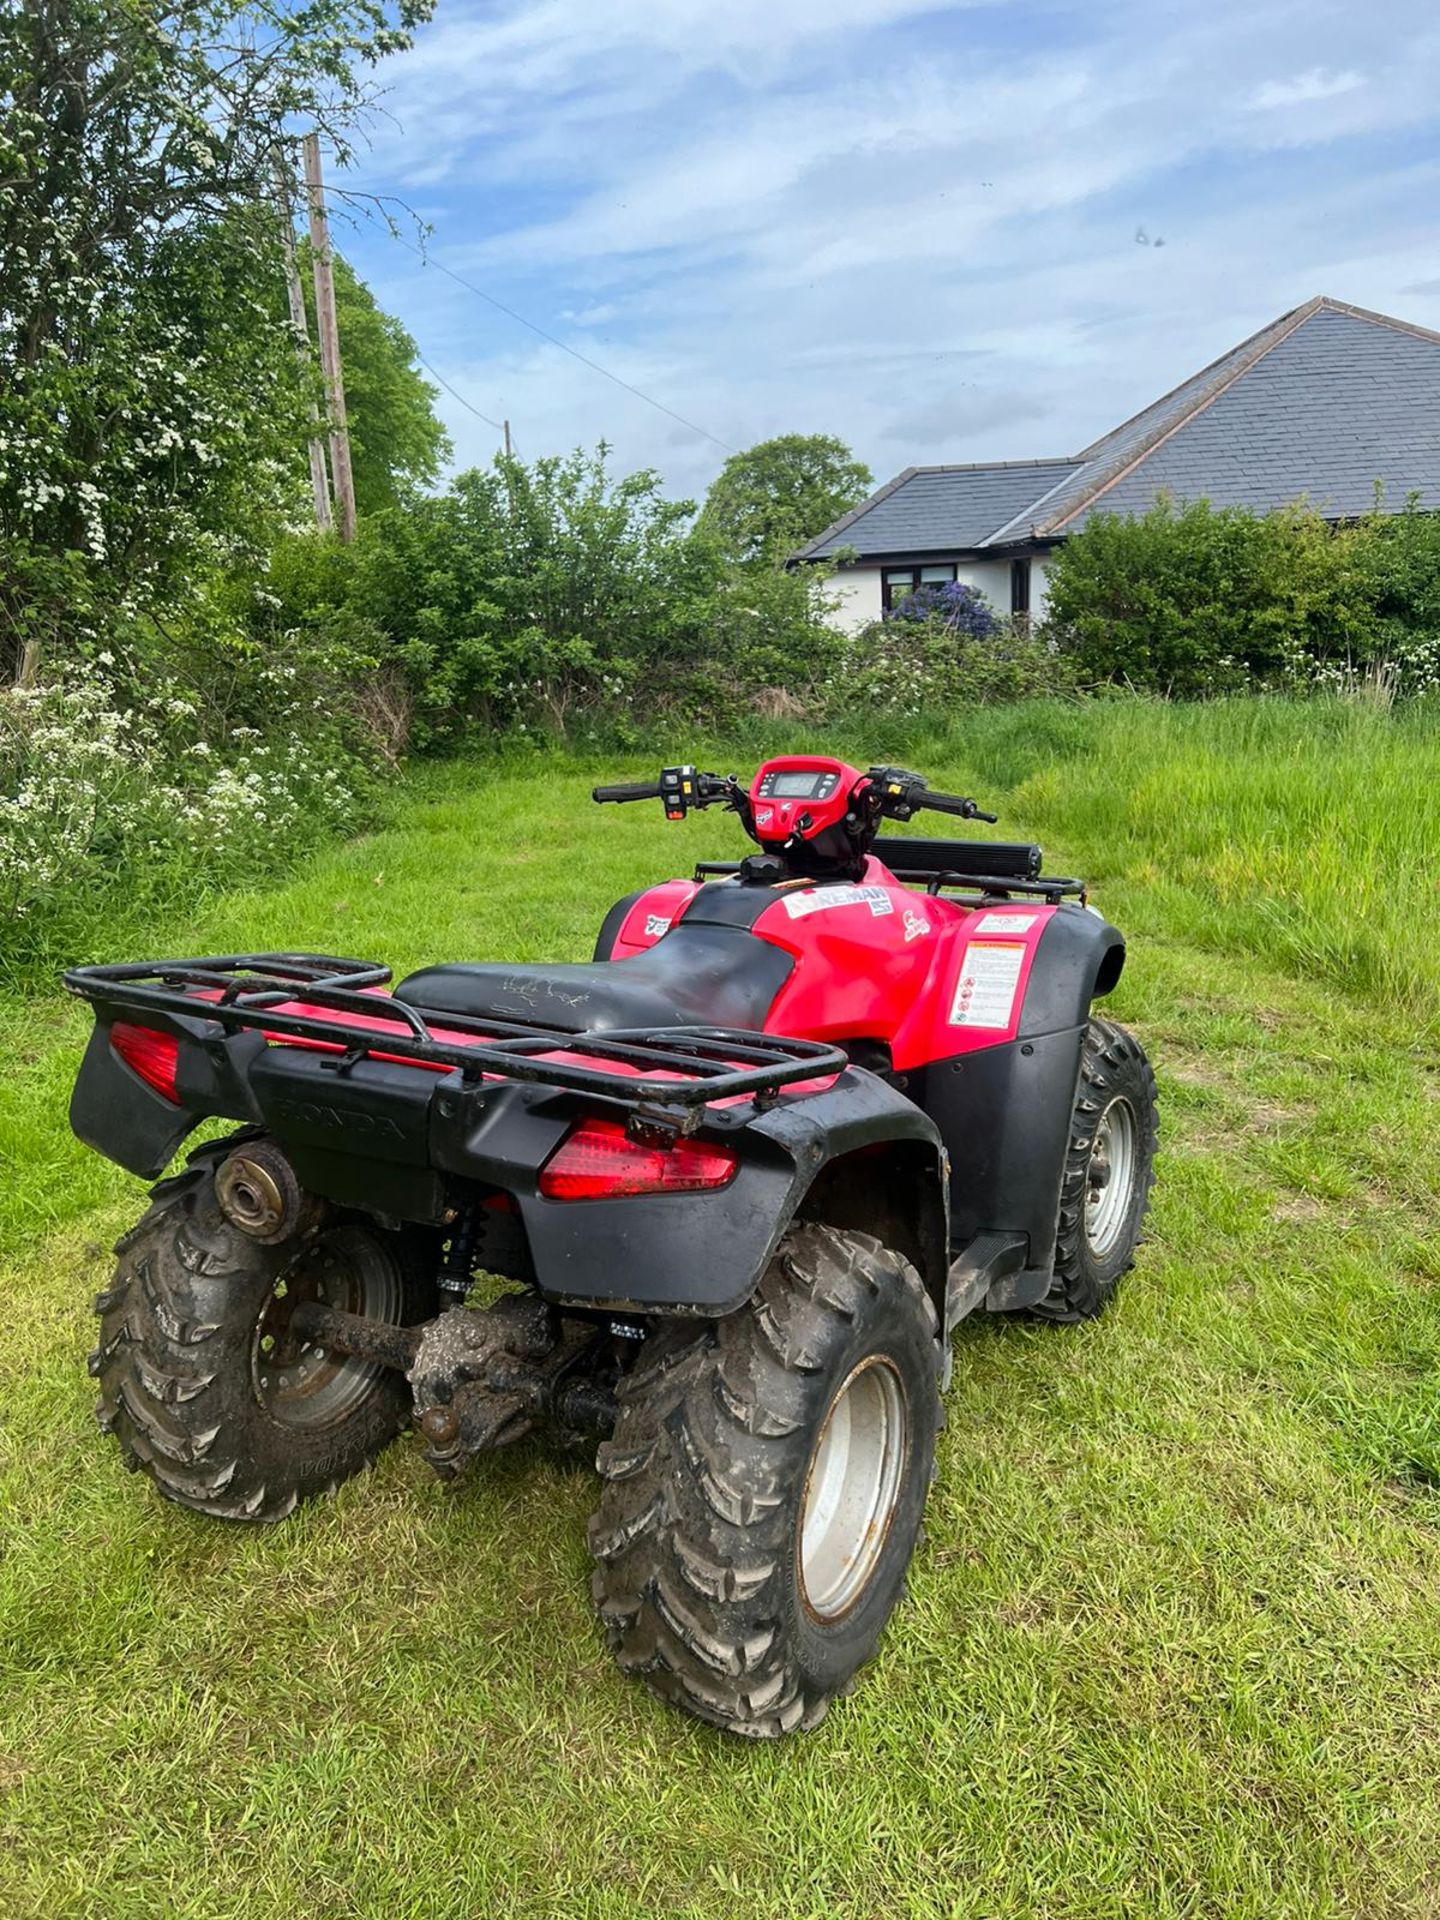 HONDA FORMAN 500 FARM QUAD, SELECTABLE 2 and 4 WHEEL DRIVE, IN GOOD CONDITION "PLUS VAT" - Image 3 of 12